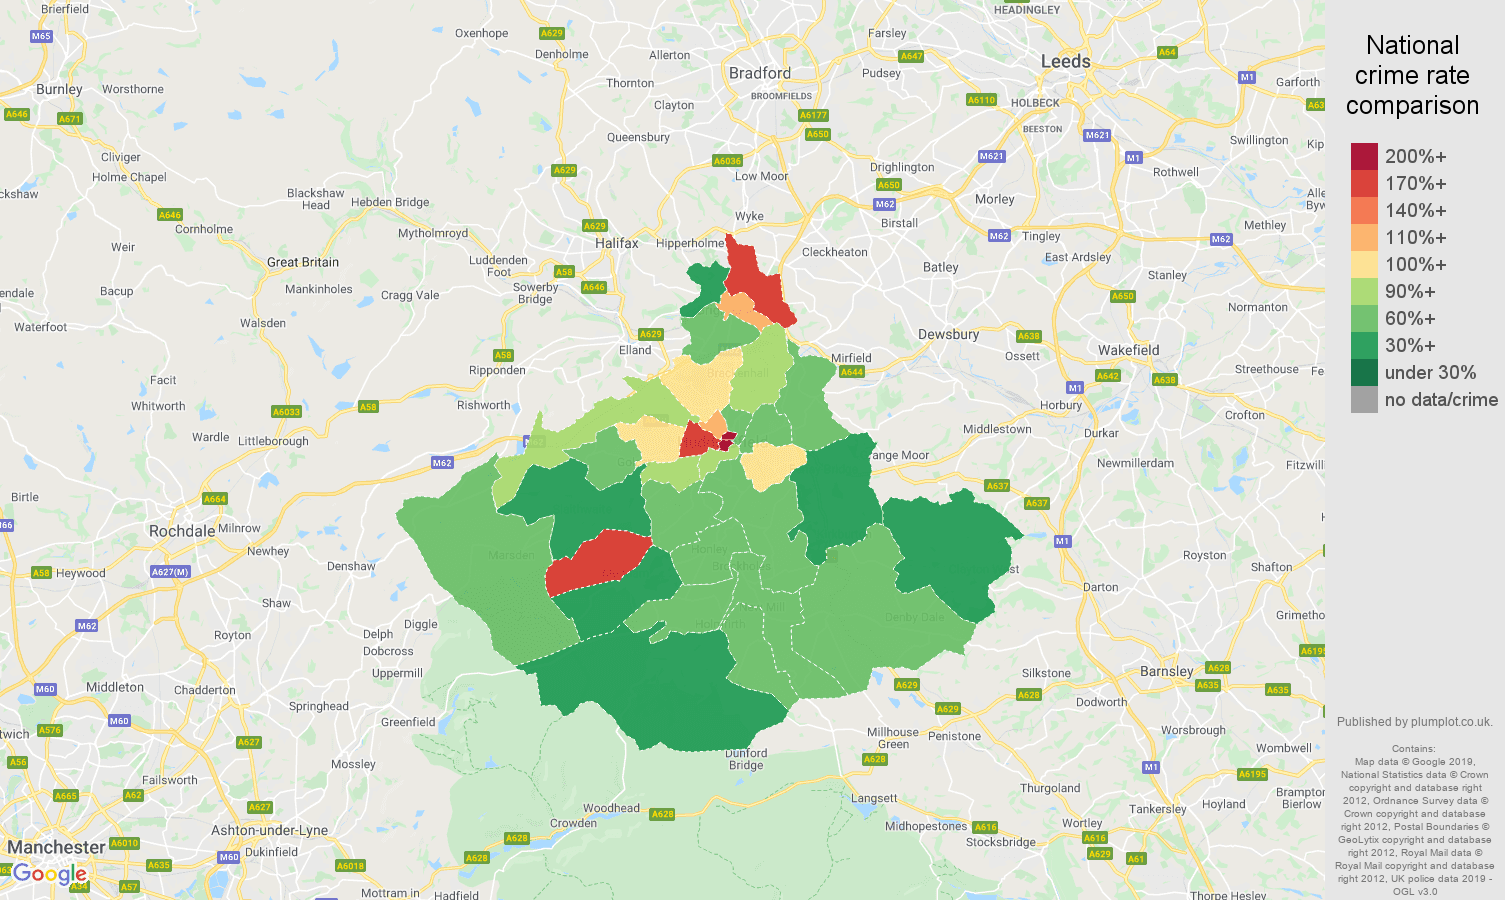 Huddersfield other theft crime rate comparison map